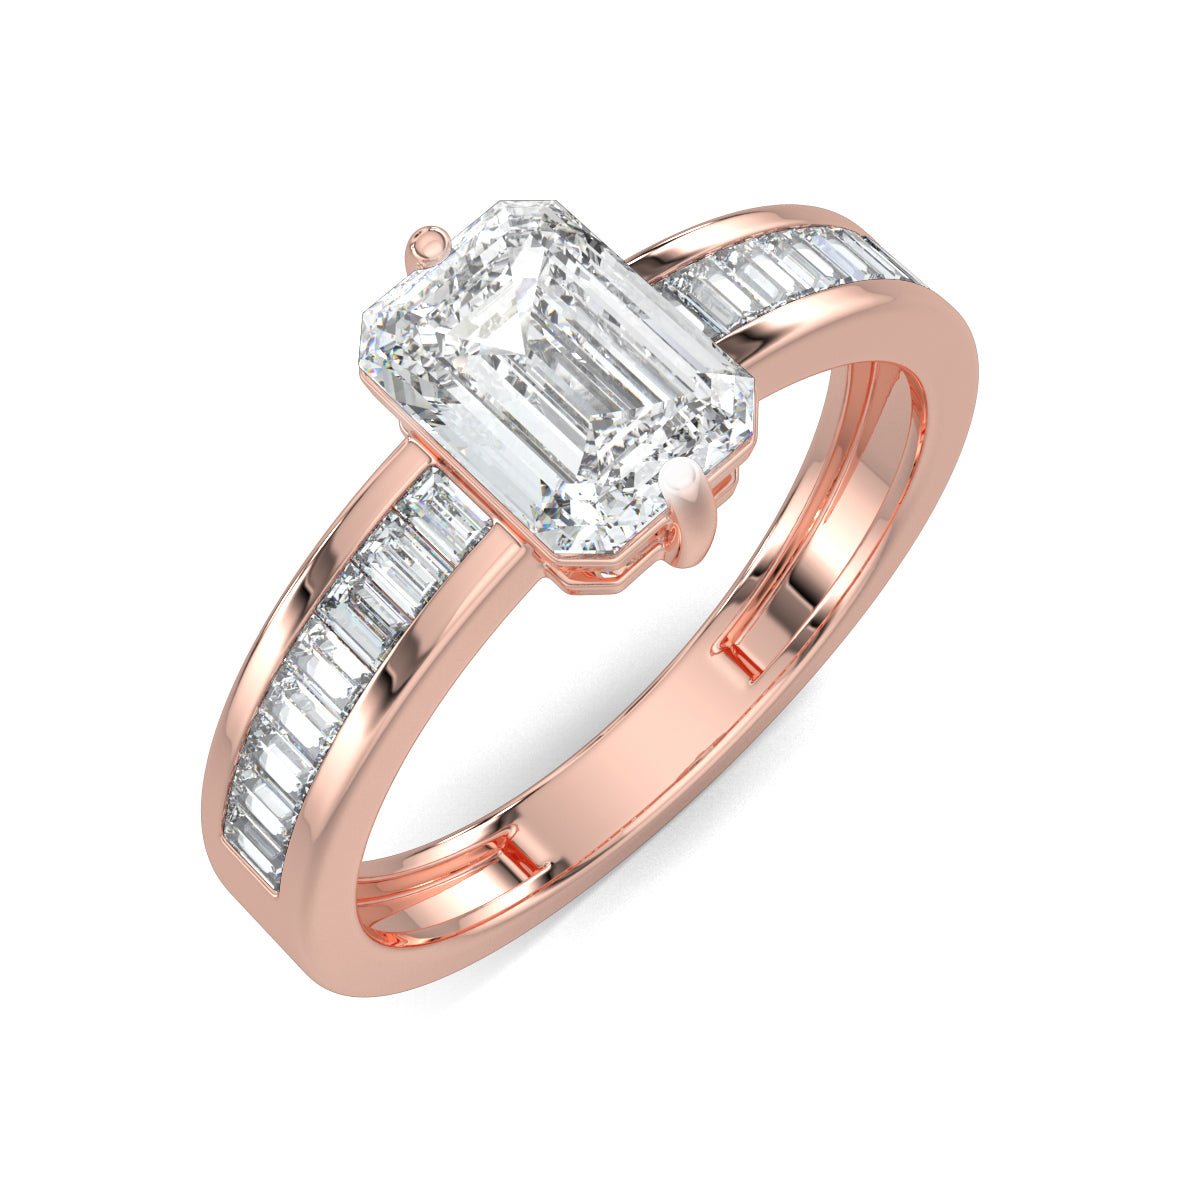 Rose Gold, Diamond Ring, Emerald solitaire diamond ring, Natural diamond ring, Lab-grown diamond ring, Solitaire diamond band ring, Baguette diamond channeling ring